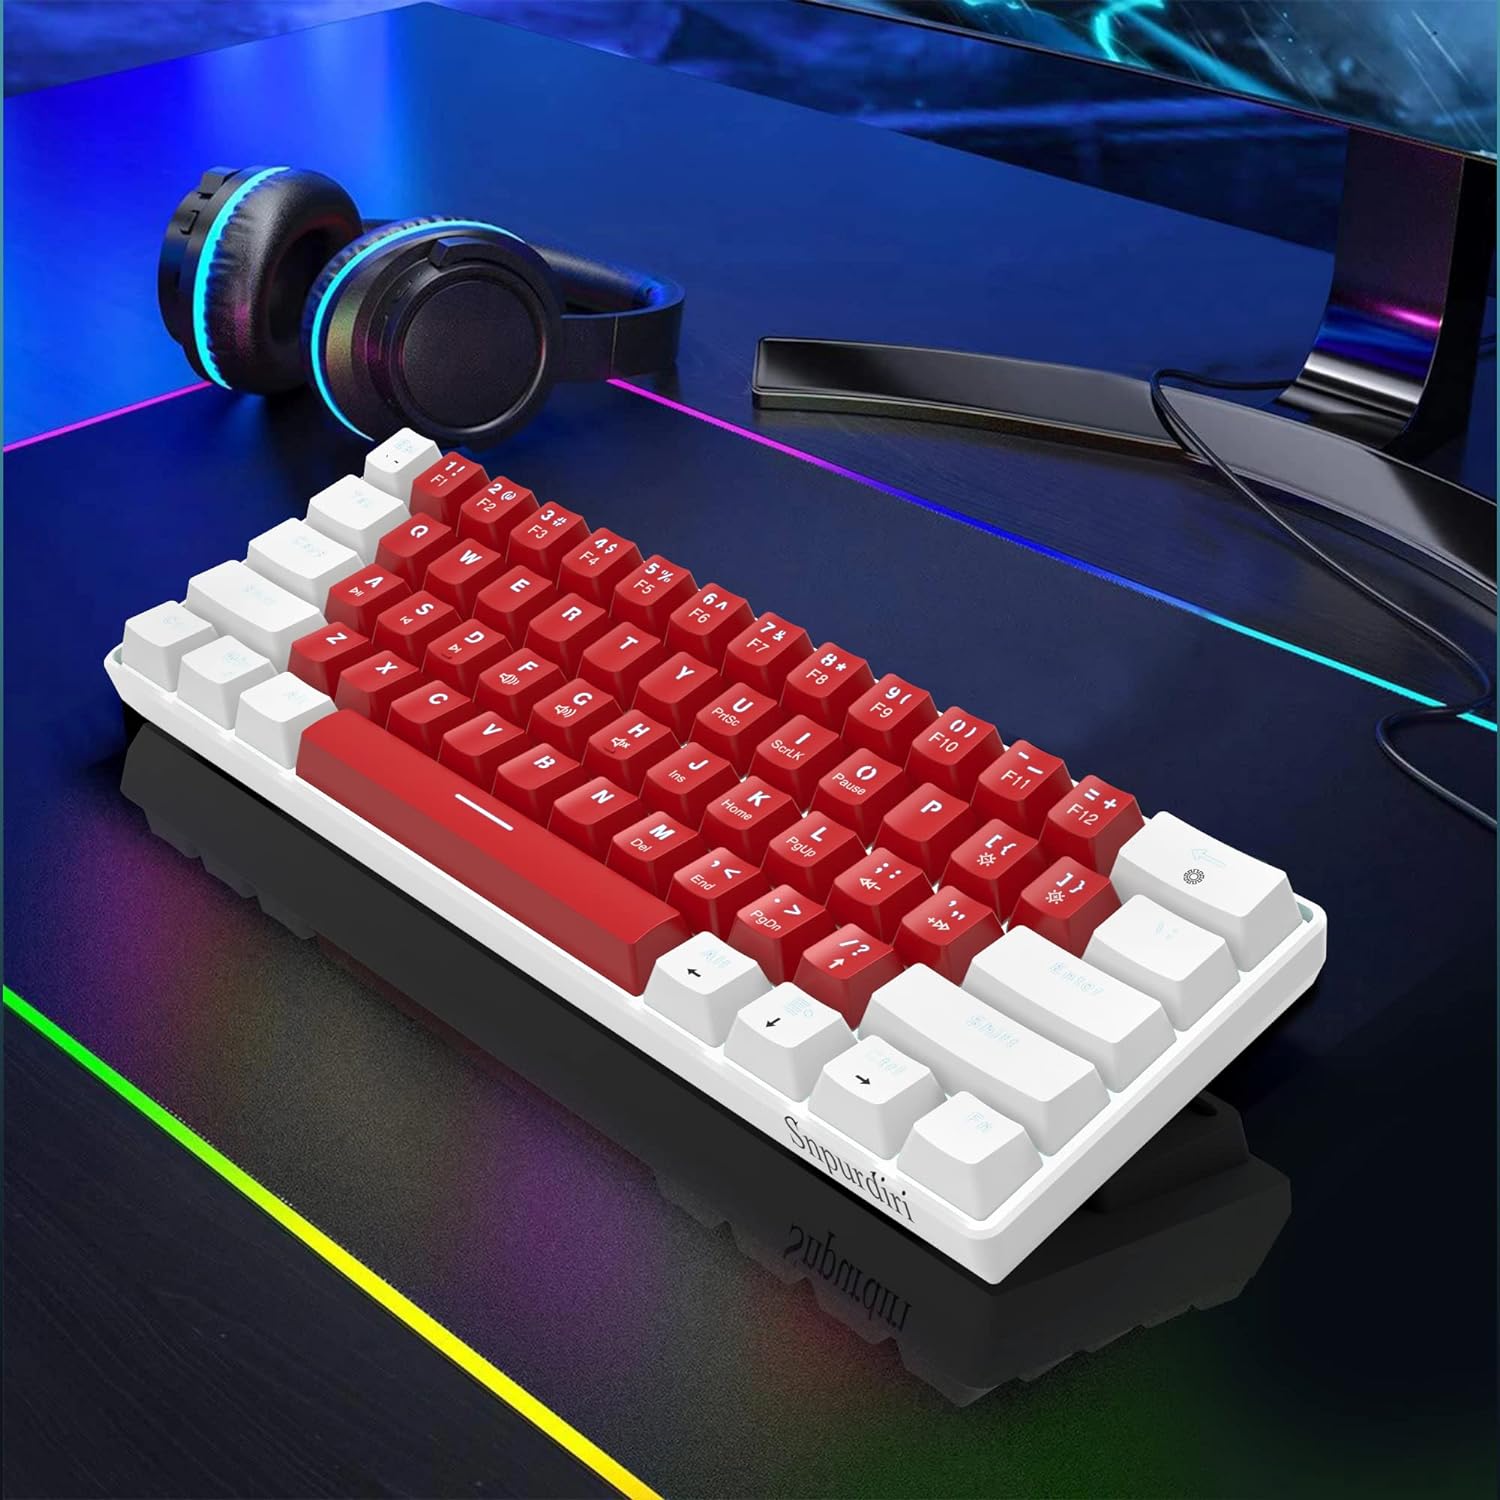 Snpurdiri Wired 60% Mechanical Gaming Keyboard, White LED Backlit Ultra-Compact Small Office Keyboard for Windows Laptop PC Mac (White-Red, Red Switches)